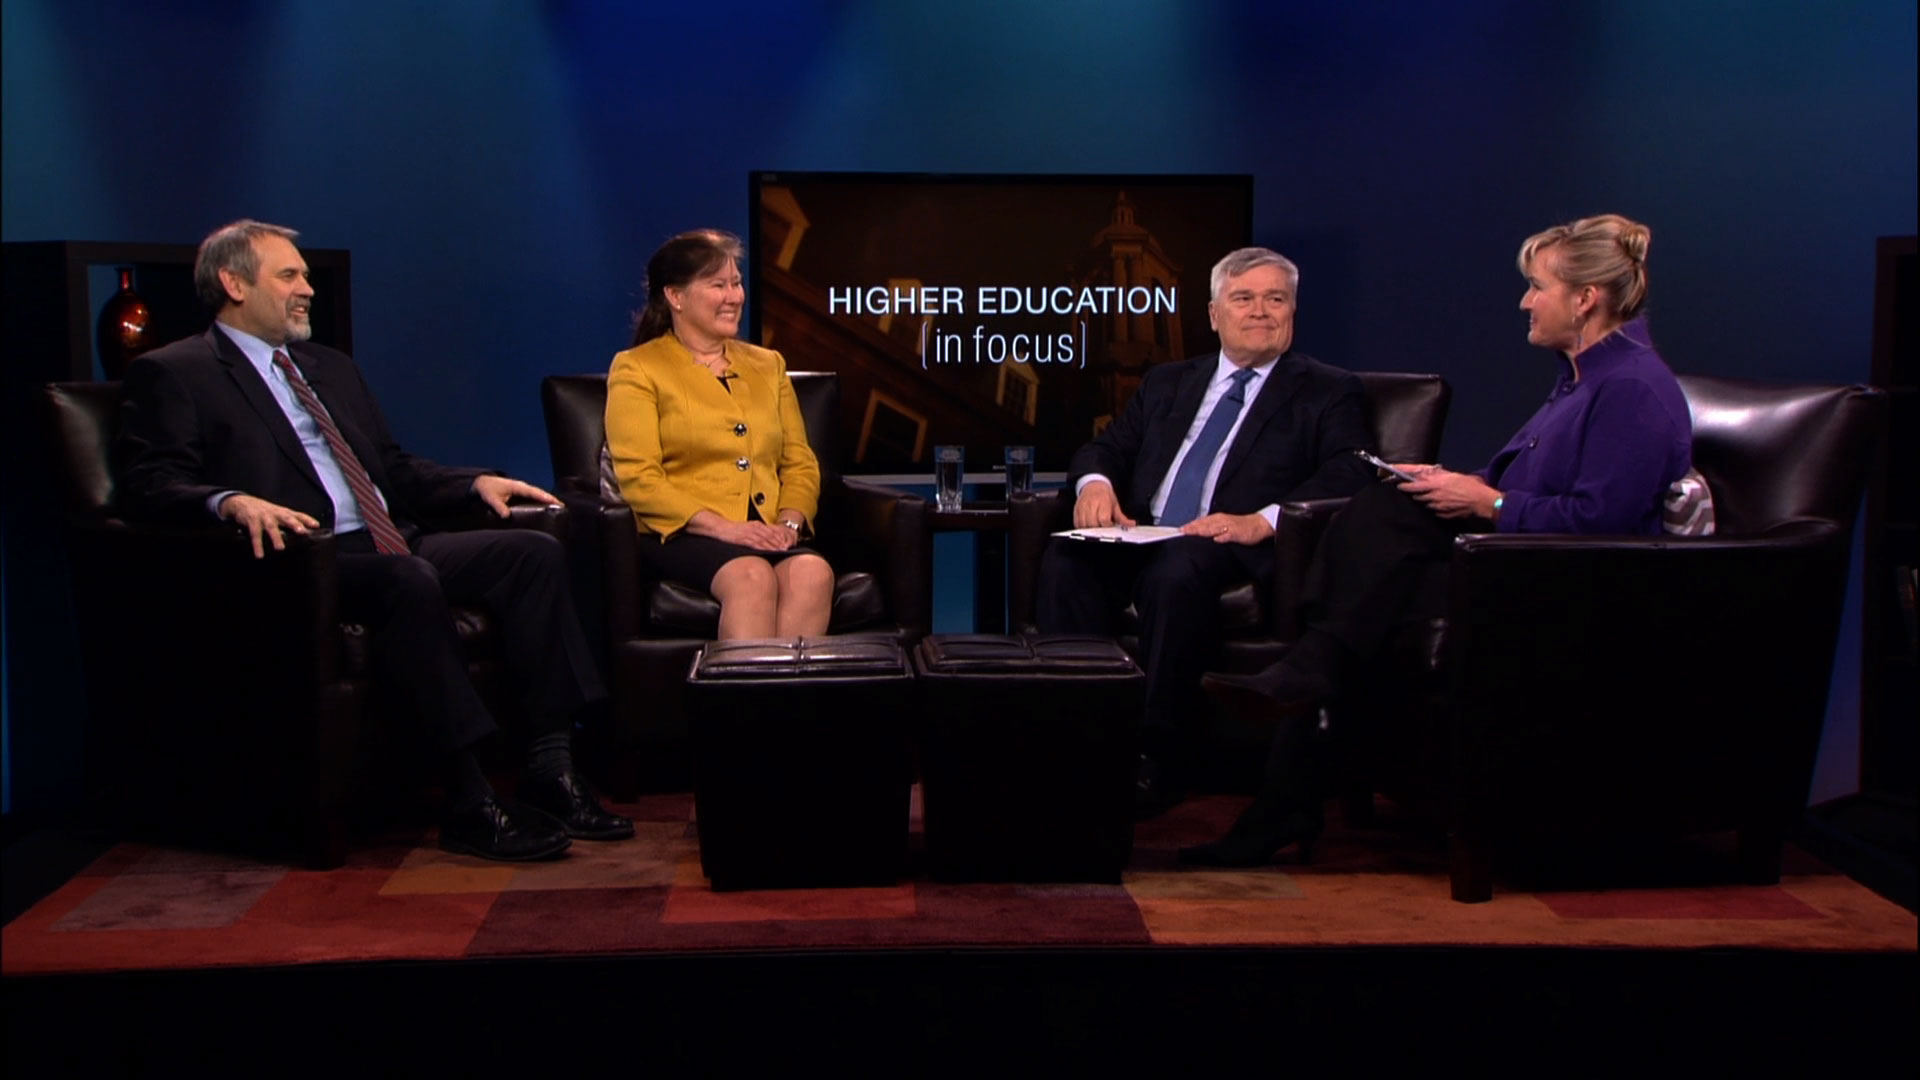 Renata S. Engel and David Christiansen with Eric Baron and Patty Satalia on the set of Higher Education in Focus